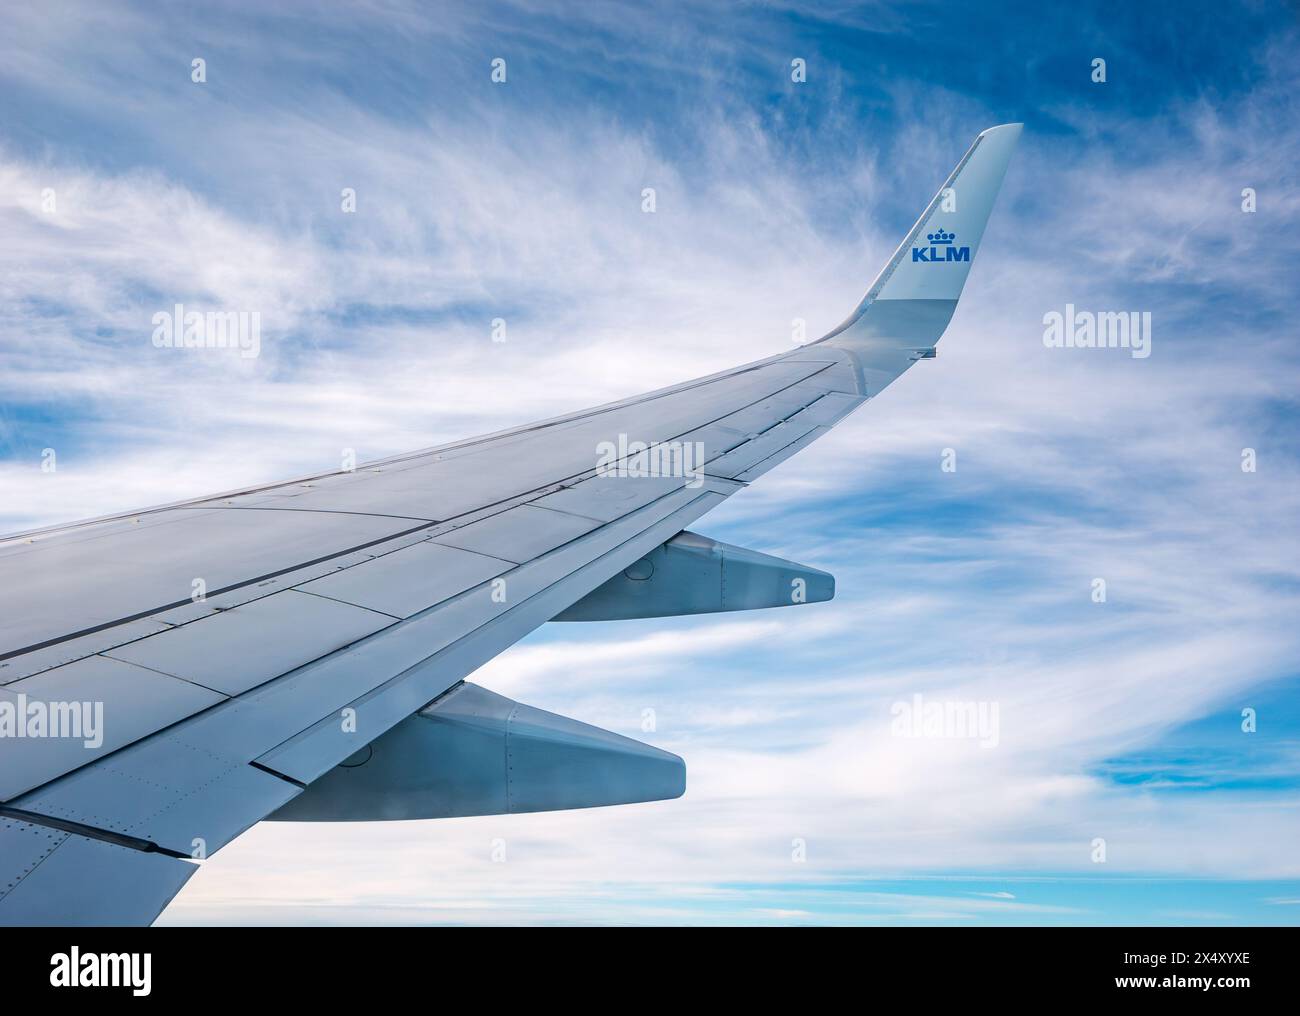 View from KLM plane window of airplane wing against wispy clouds and sky Stock Photo